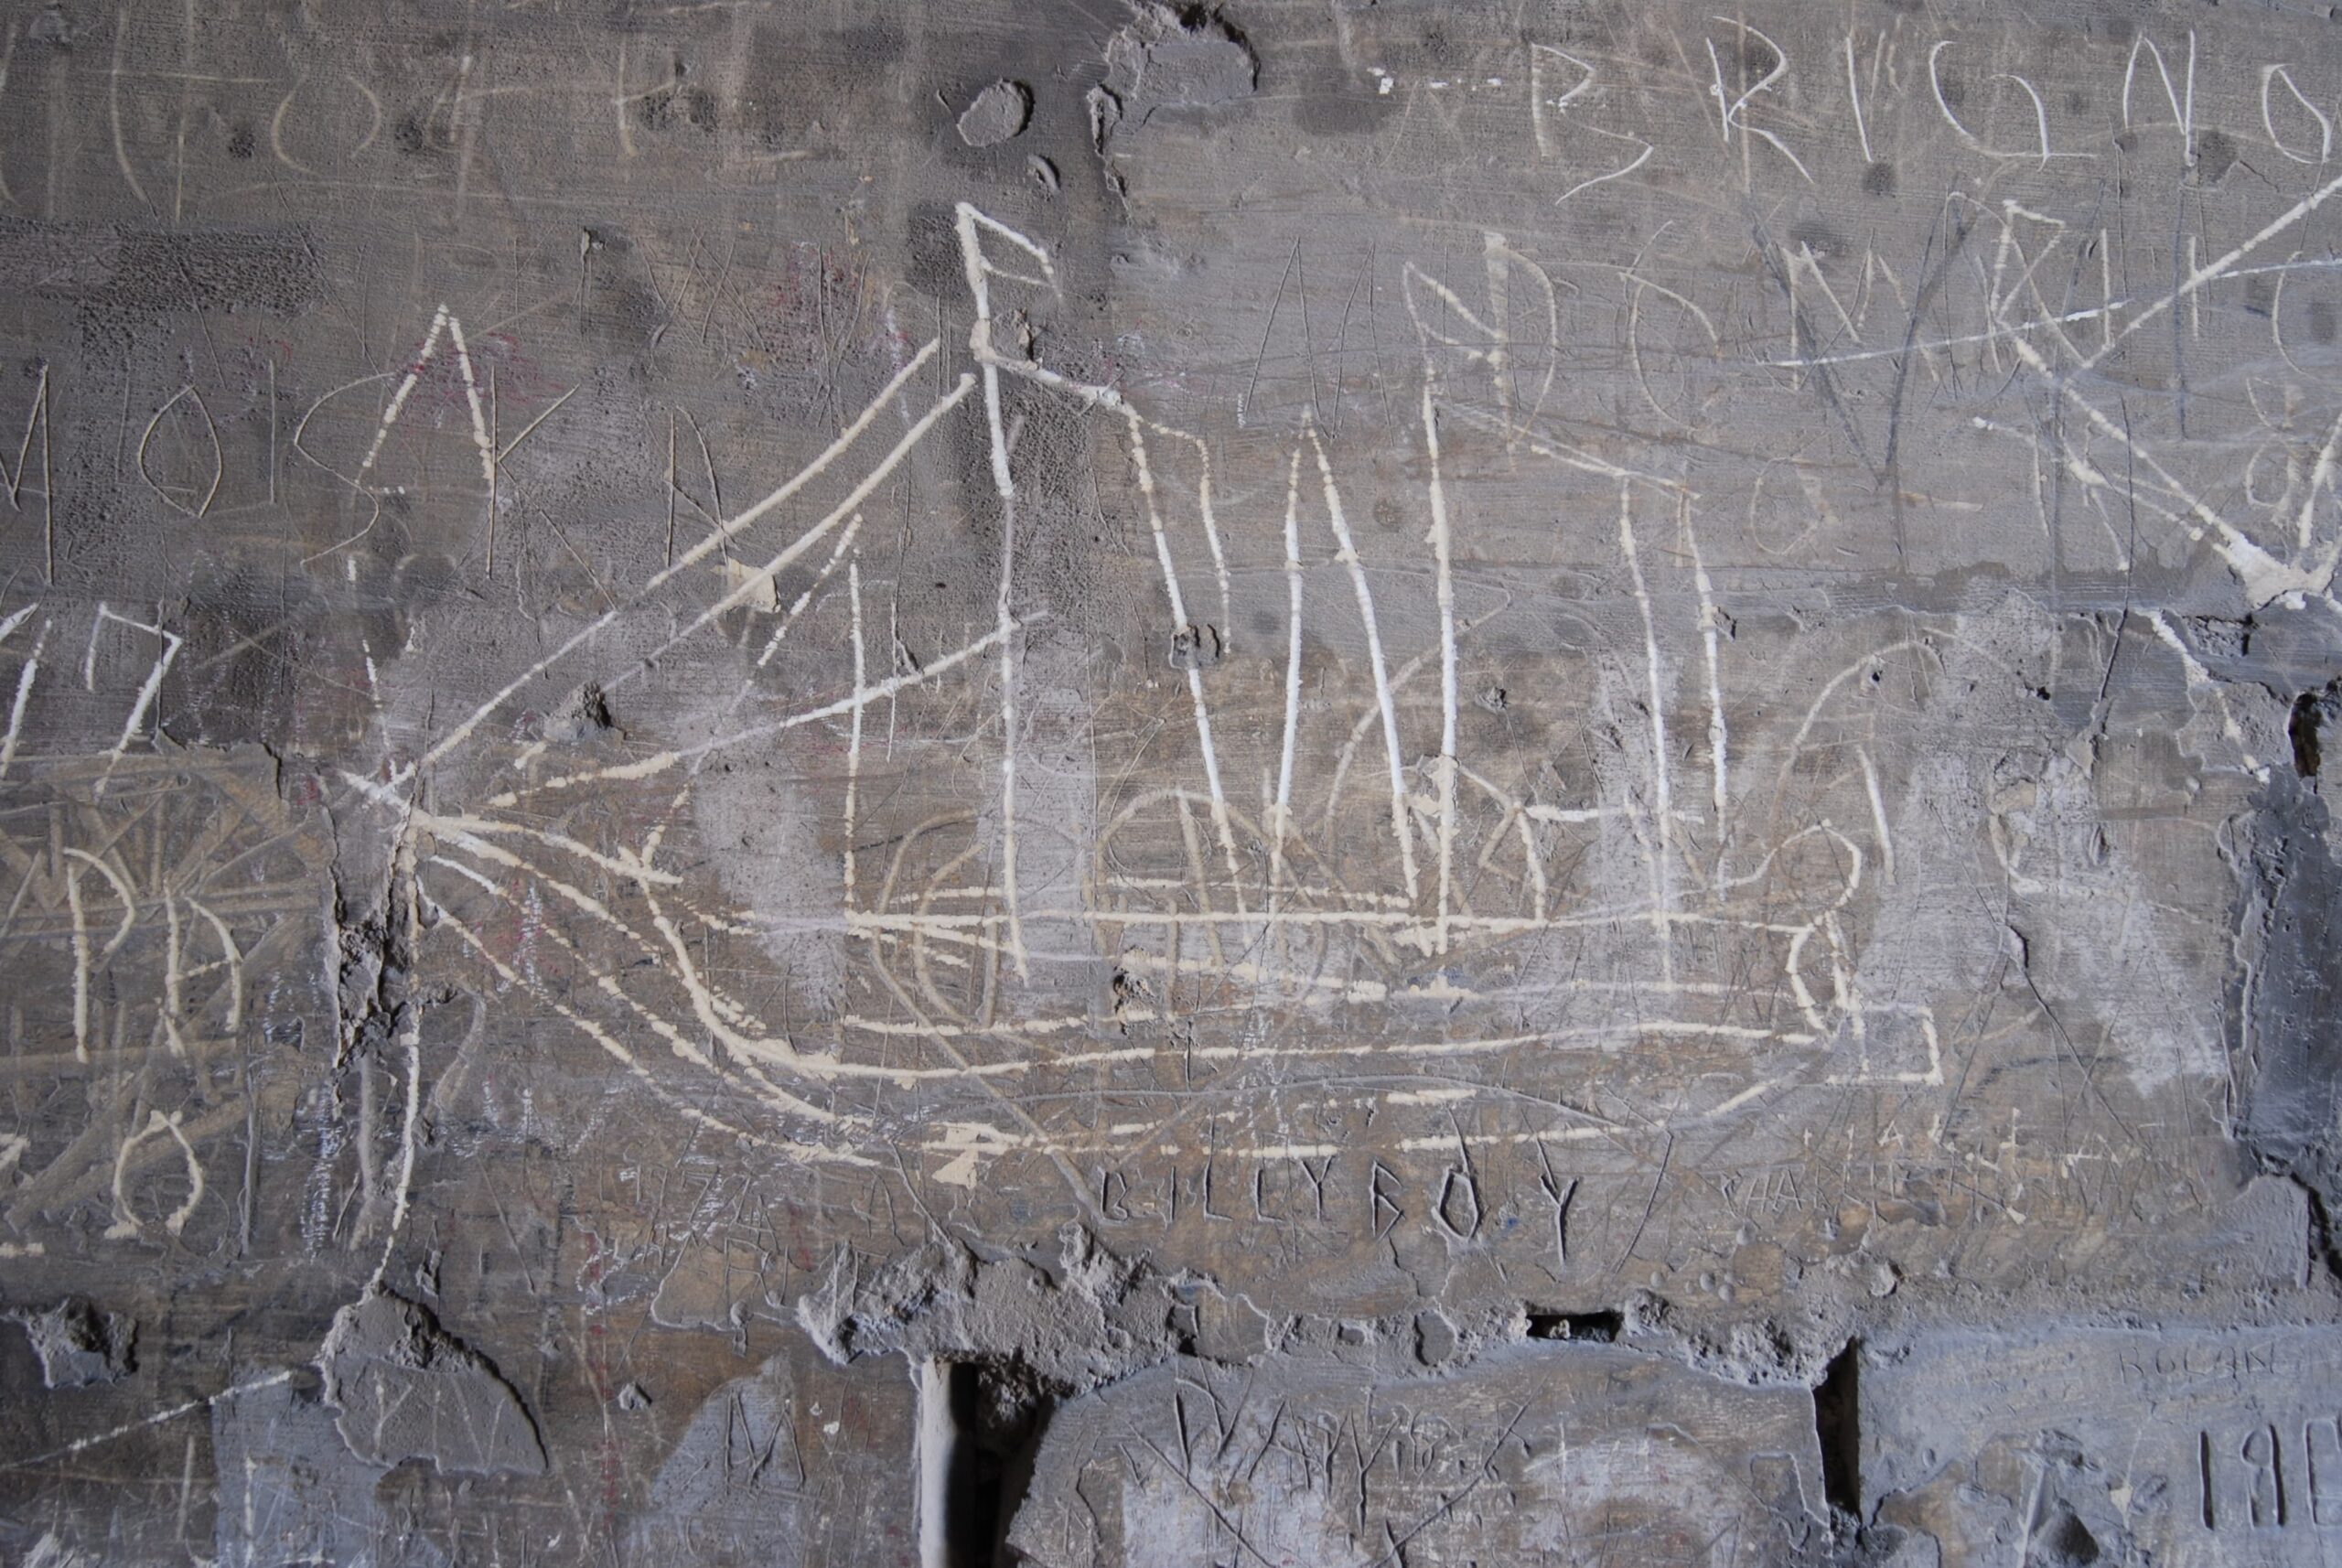 A third of the surface-etched steam and sail ship graffito.